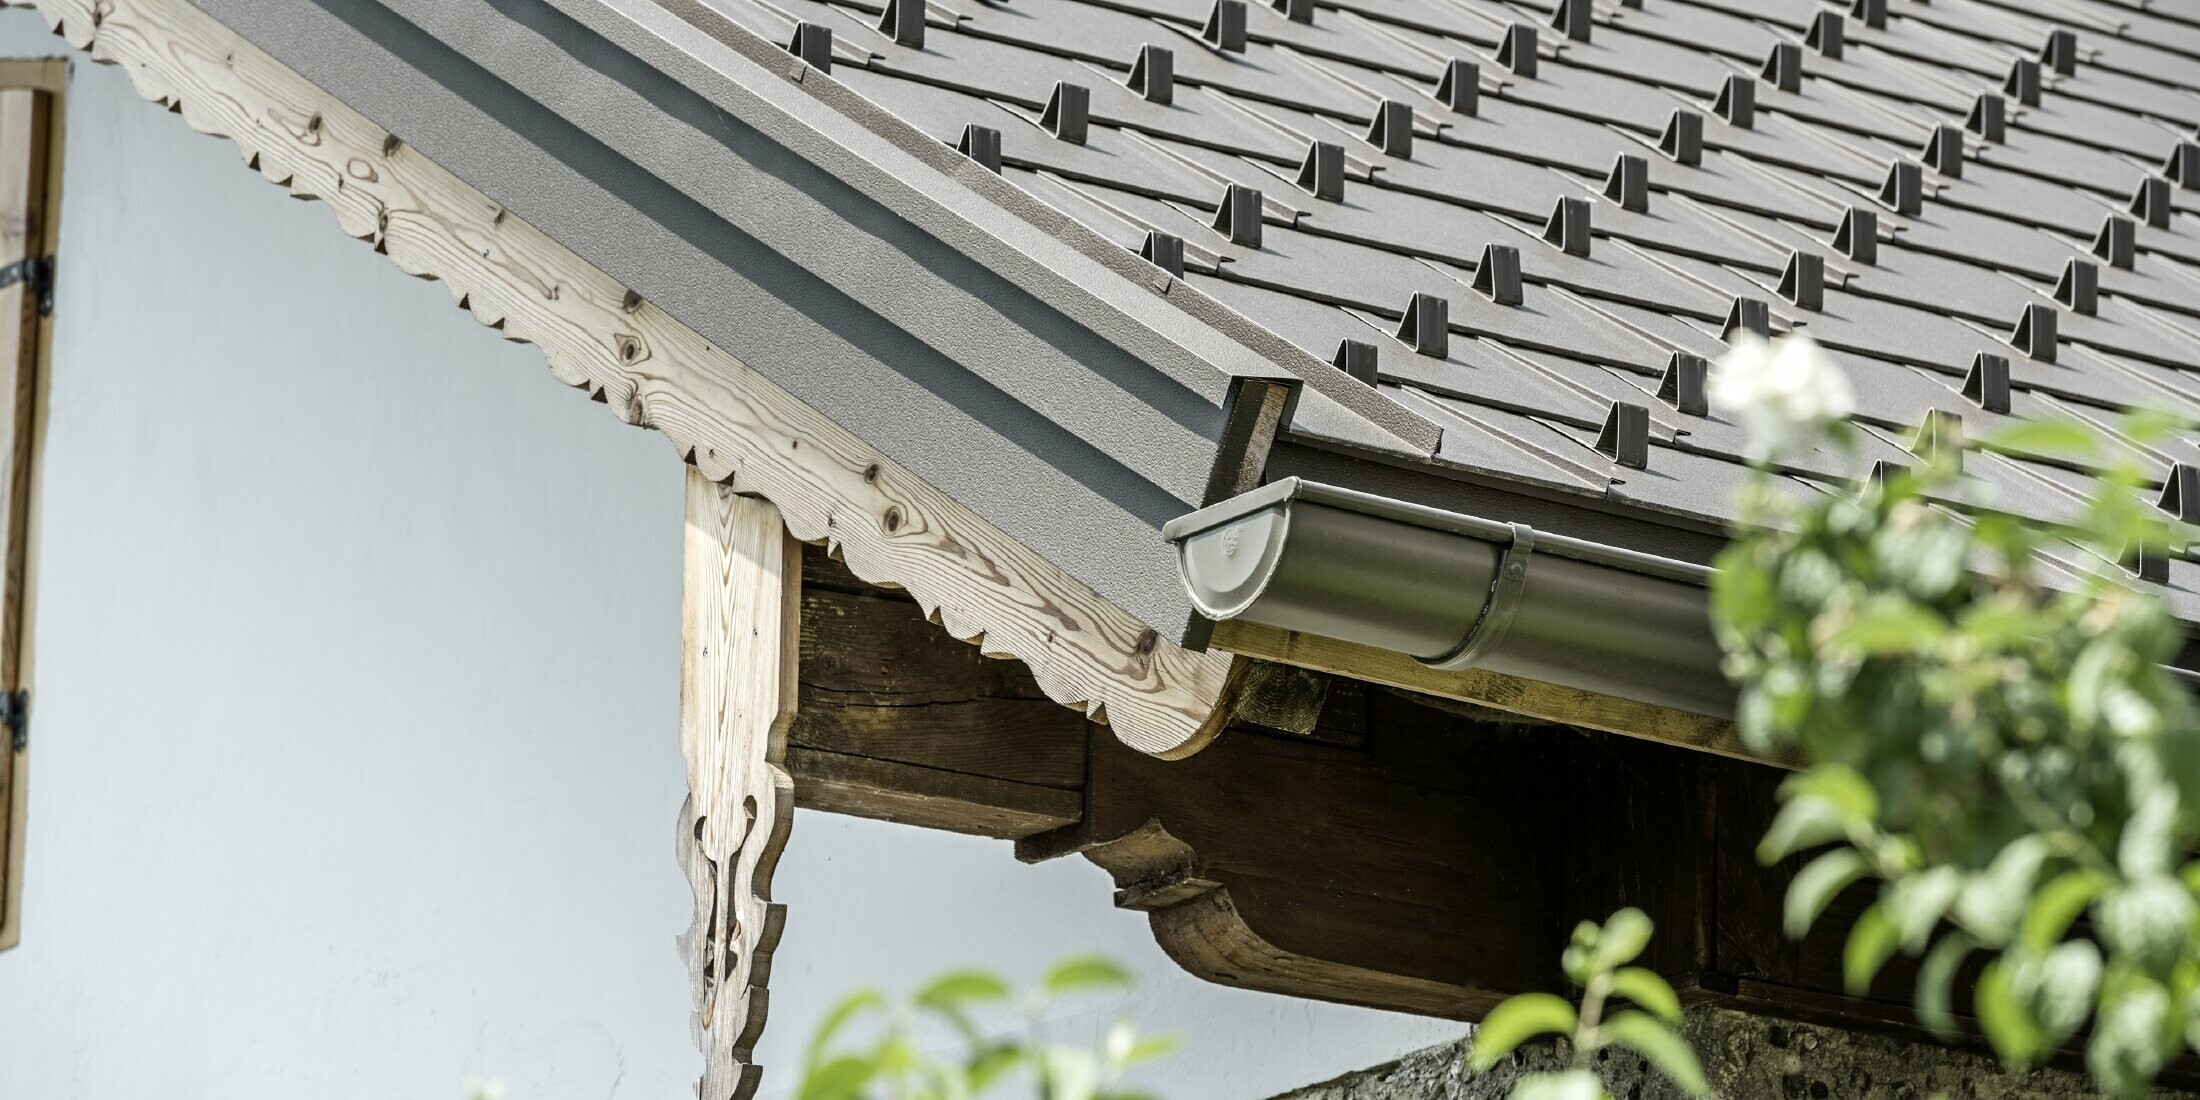 PREFA gutter in brown with the PREFA R.16 roof tile and verge trim, also in brown